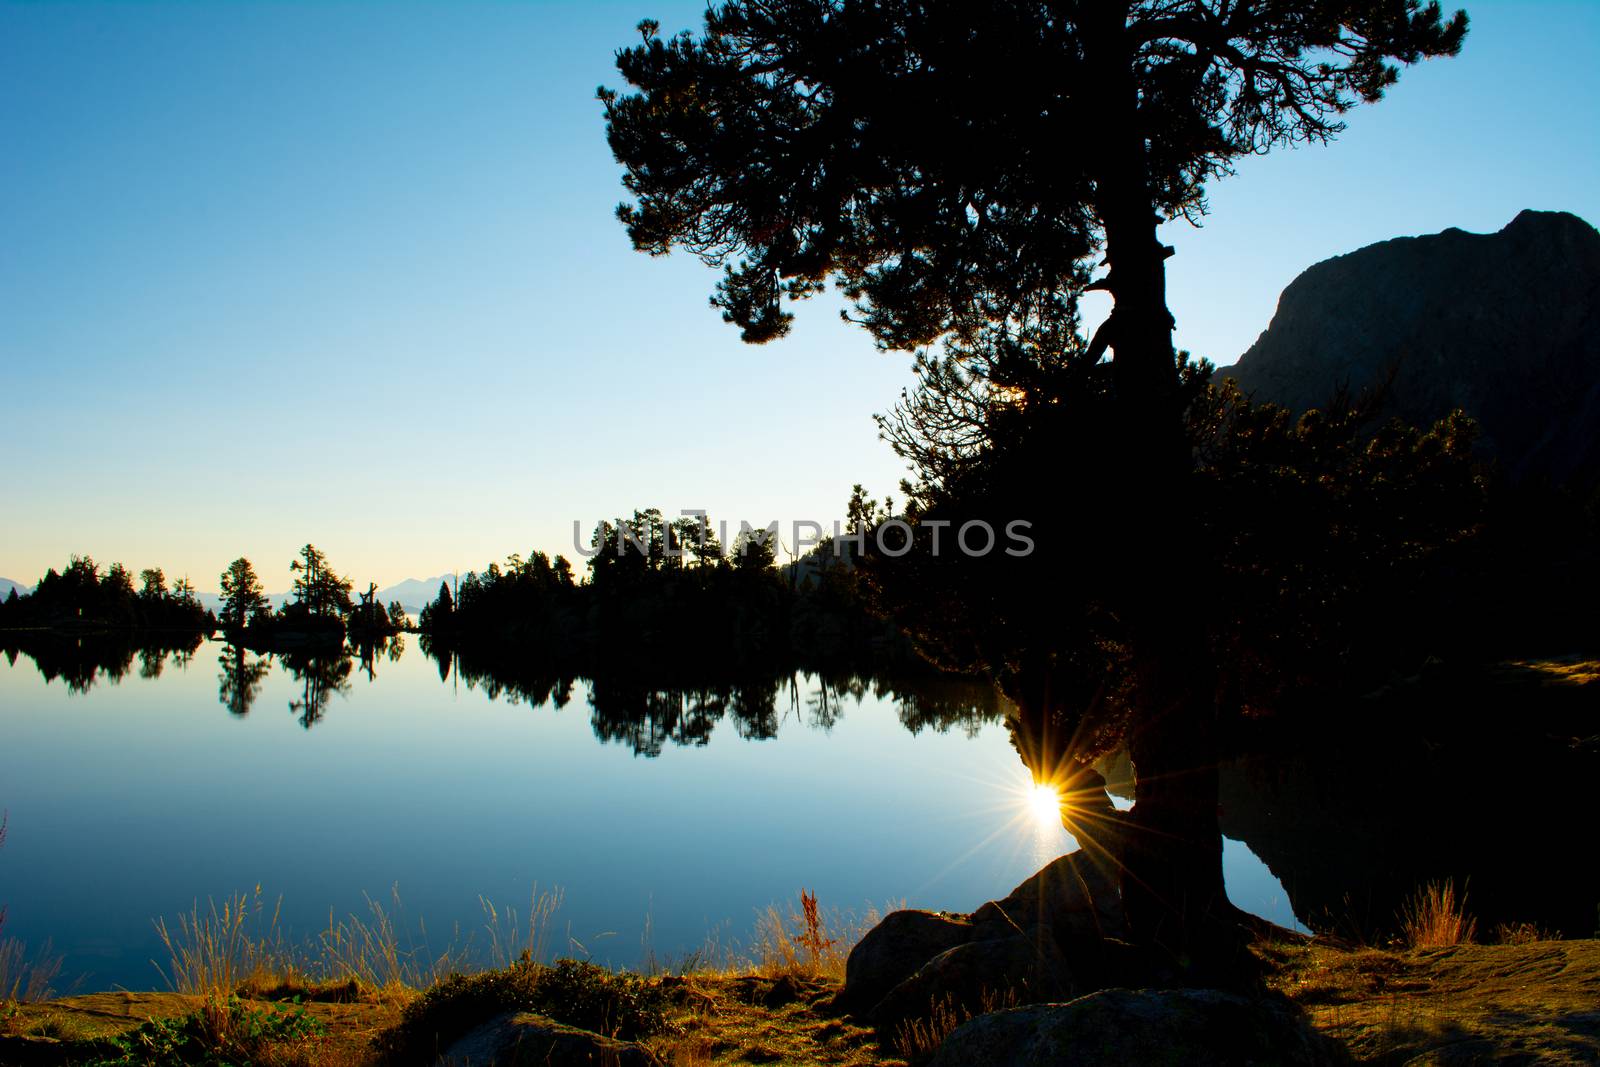 Sunset silhouette of trees and lake in natural enviornment, blue sky, reflections of landscape by kb79